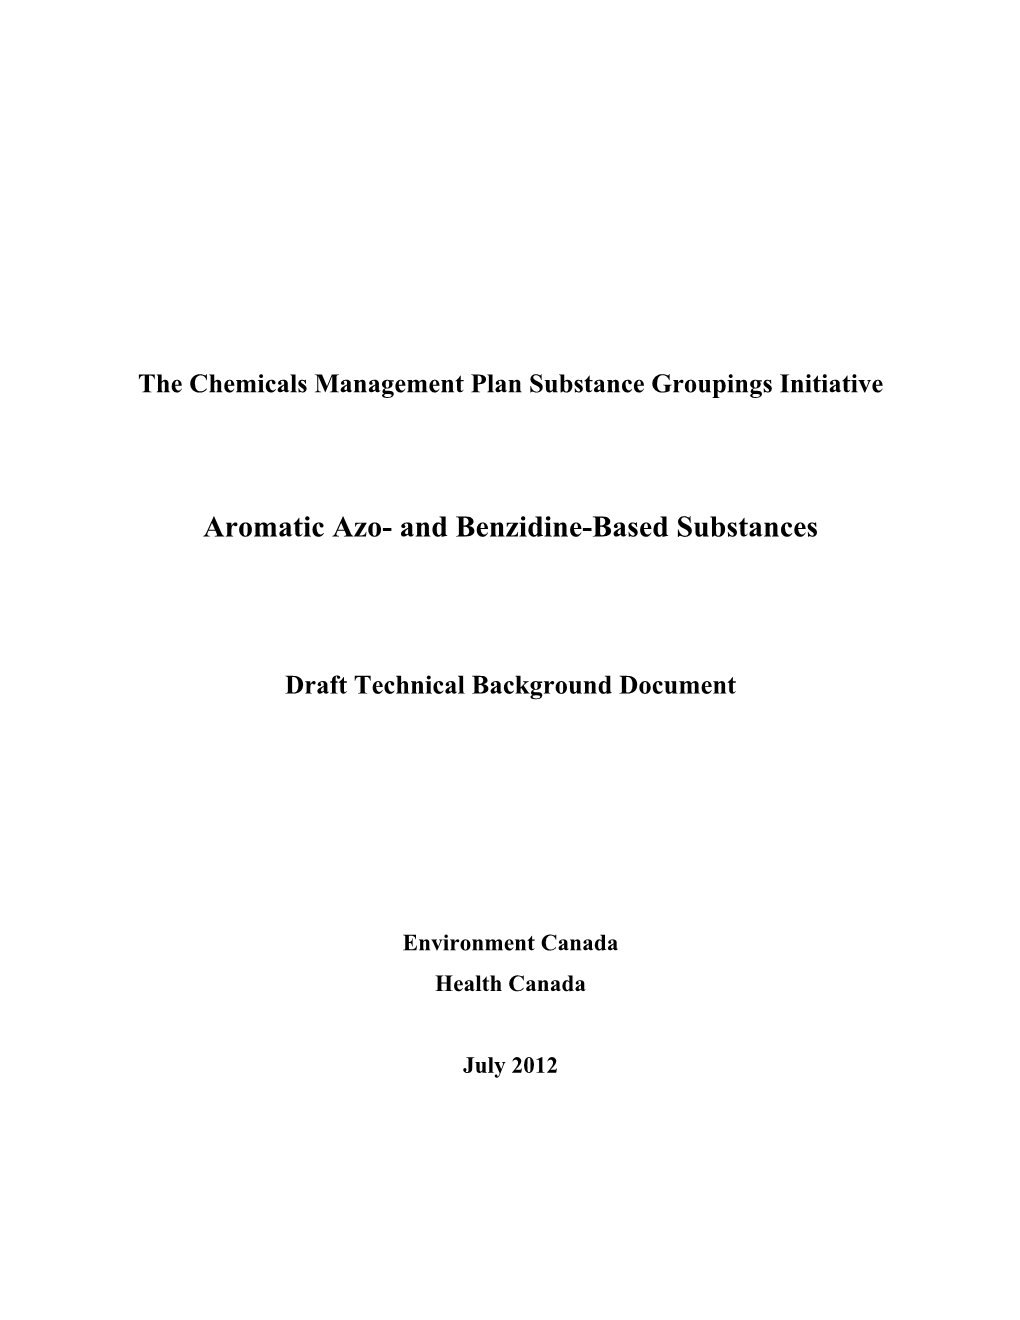 Class Assessment Approach on the Aromatic Azo- And